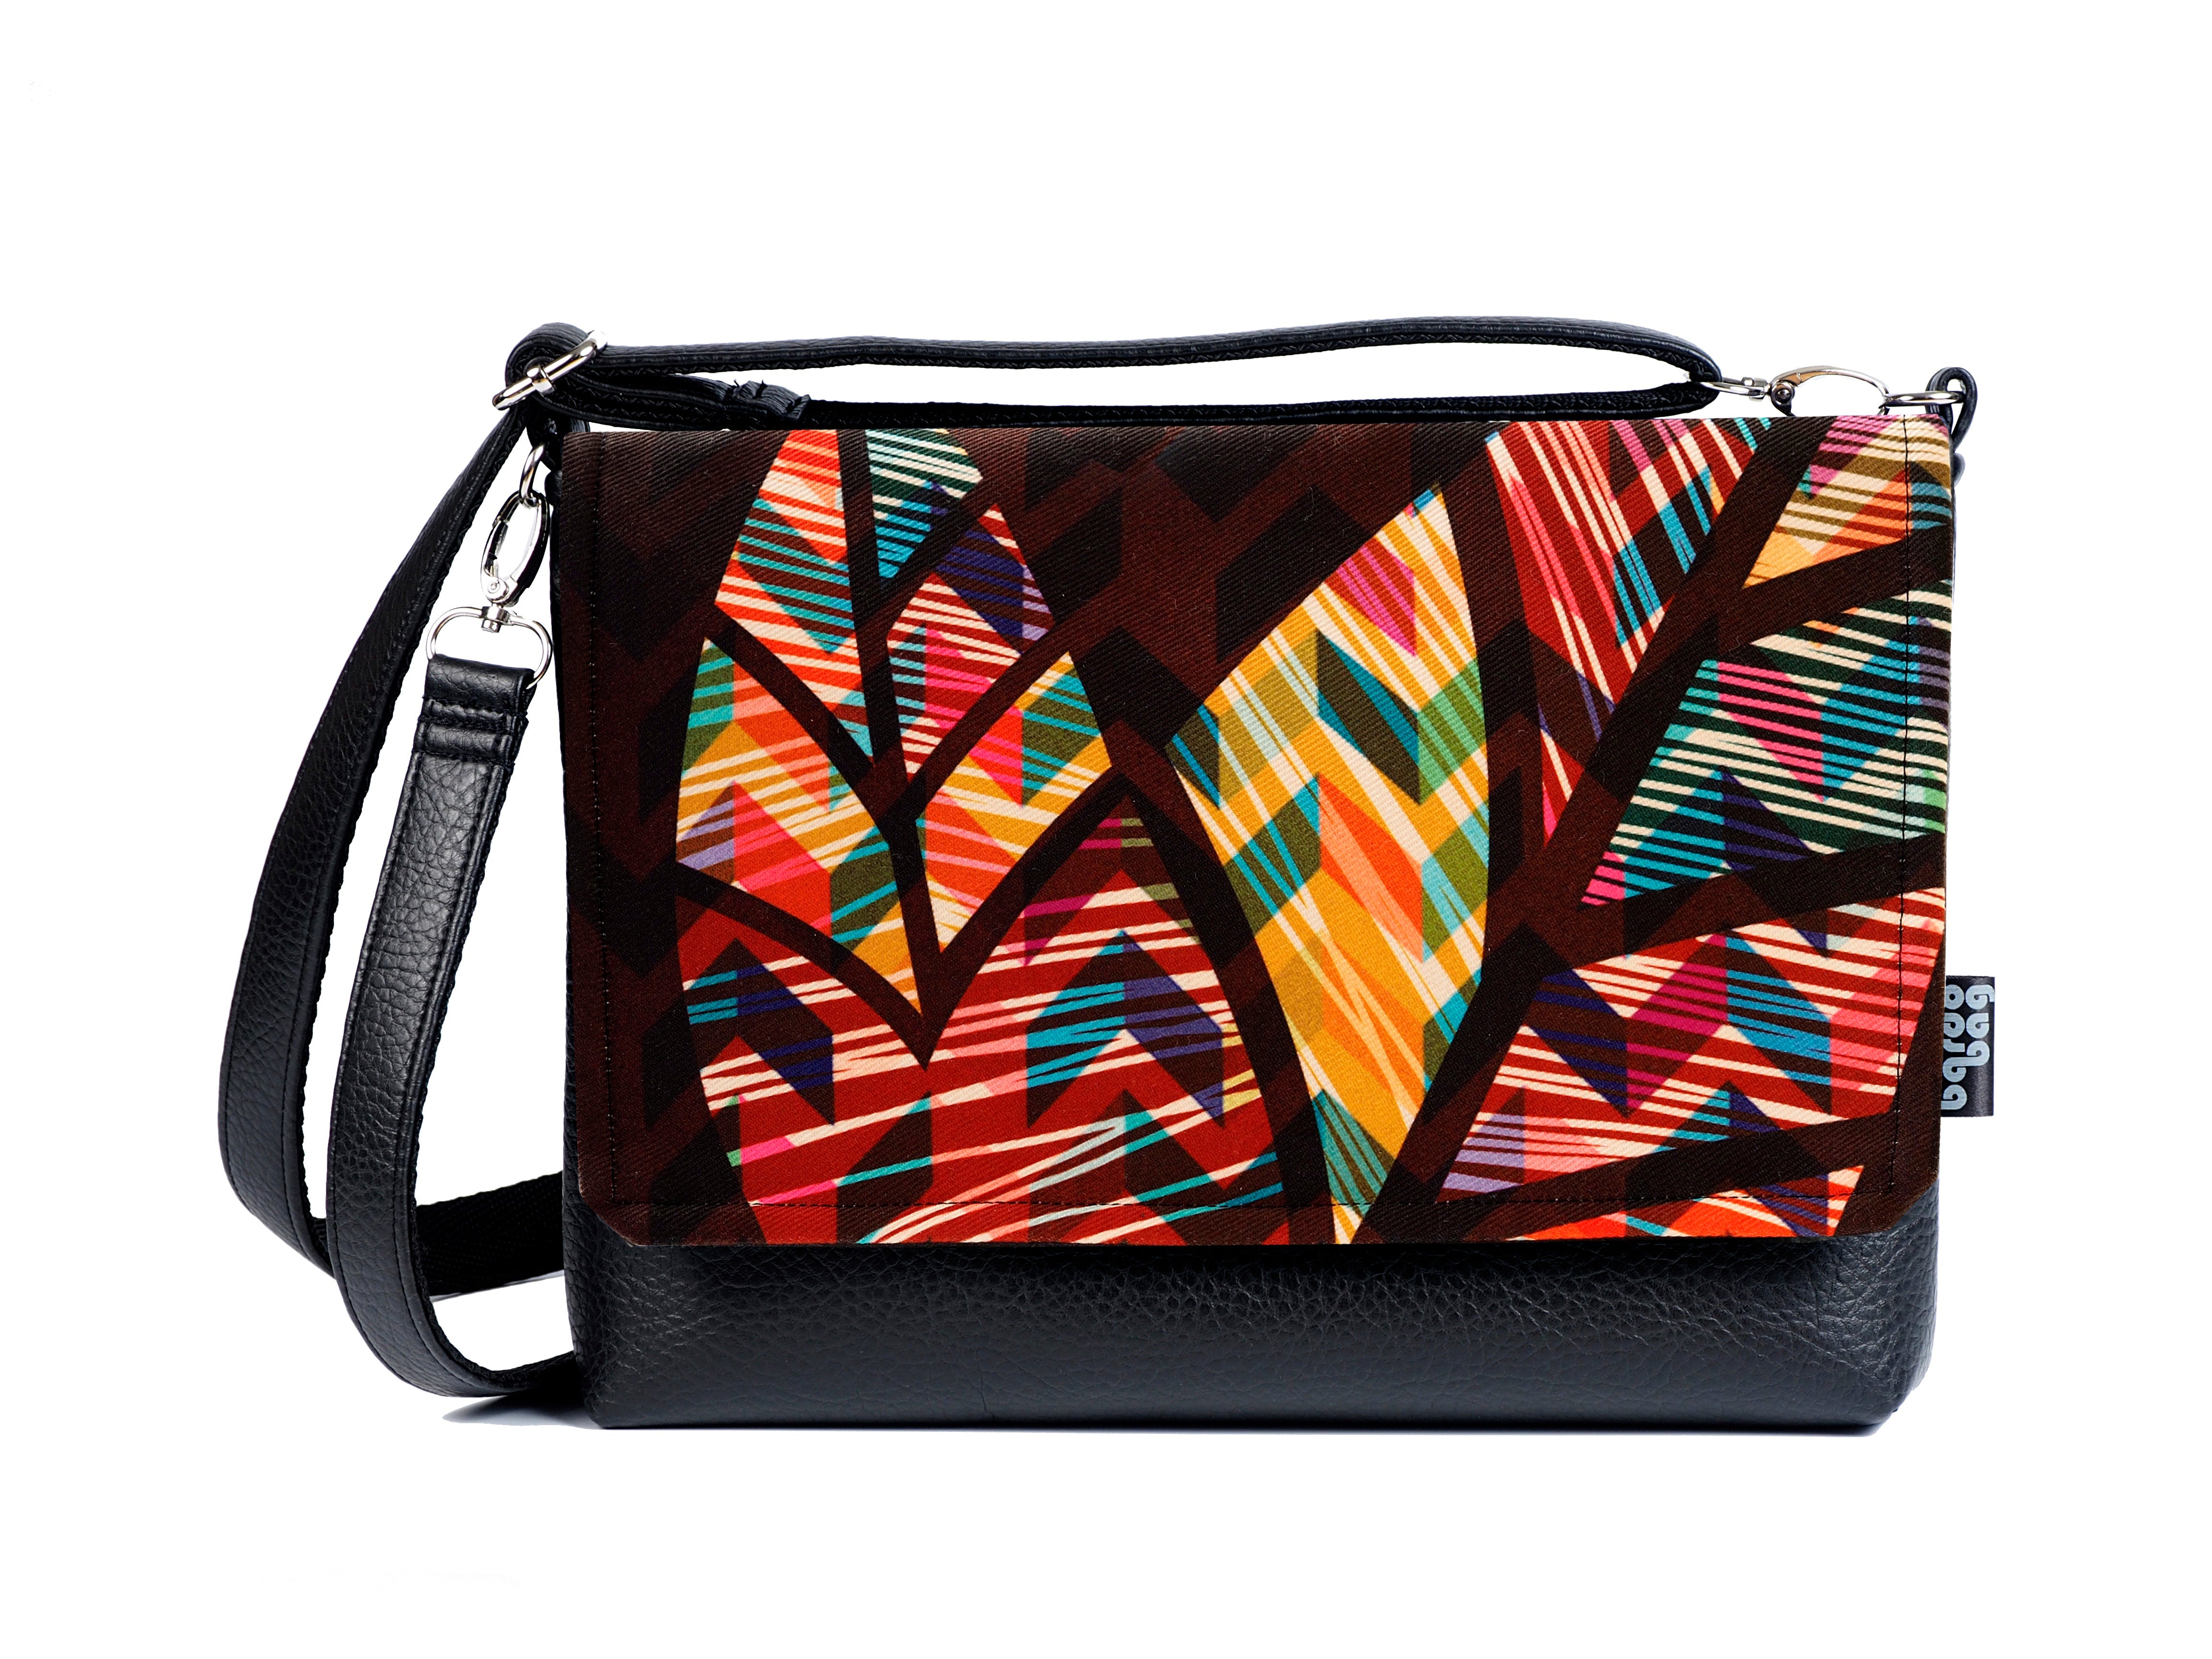 Bardo small bag - One whole - Premium Bardo small bag from BARDO ART WORKS - Just lvabstract, Art Print, black, blue, floral, gift, handemade, leaves, nature, orange, painted patterns, purple, red, urban style, vegan leather, woman, yellow59! Shop now at BARDO ART WORKS